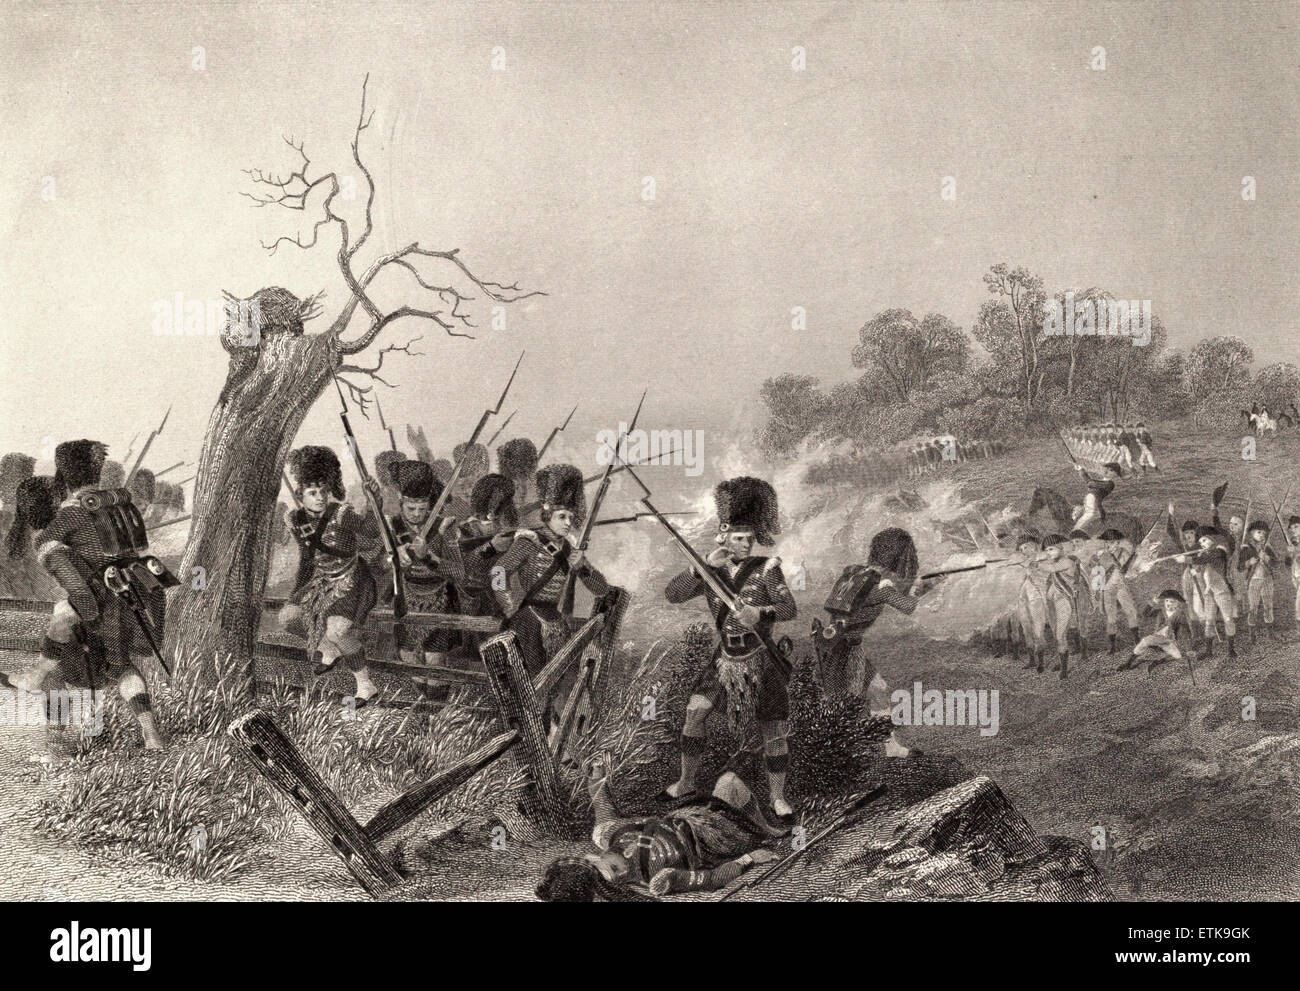 The Battle of Harlem Heights - fought during the New York and New Jersey campaign of the American Revolutionary War. The action took place in what is now the Morningside Heights and west into the future Harlem neighborhoods of northwestern Manhattan Island in New York Town on September 16, 1776. Stock Photo